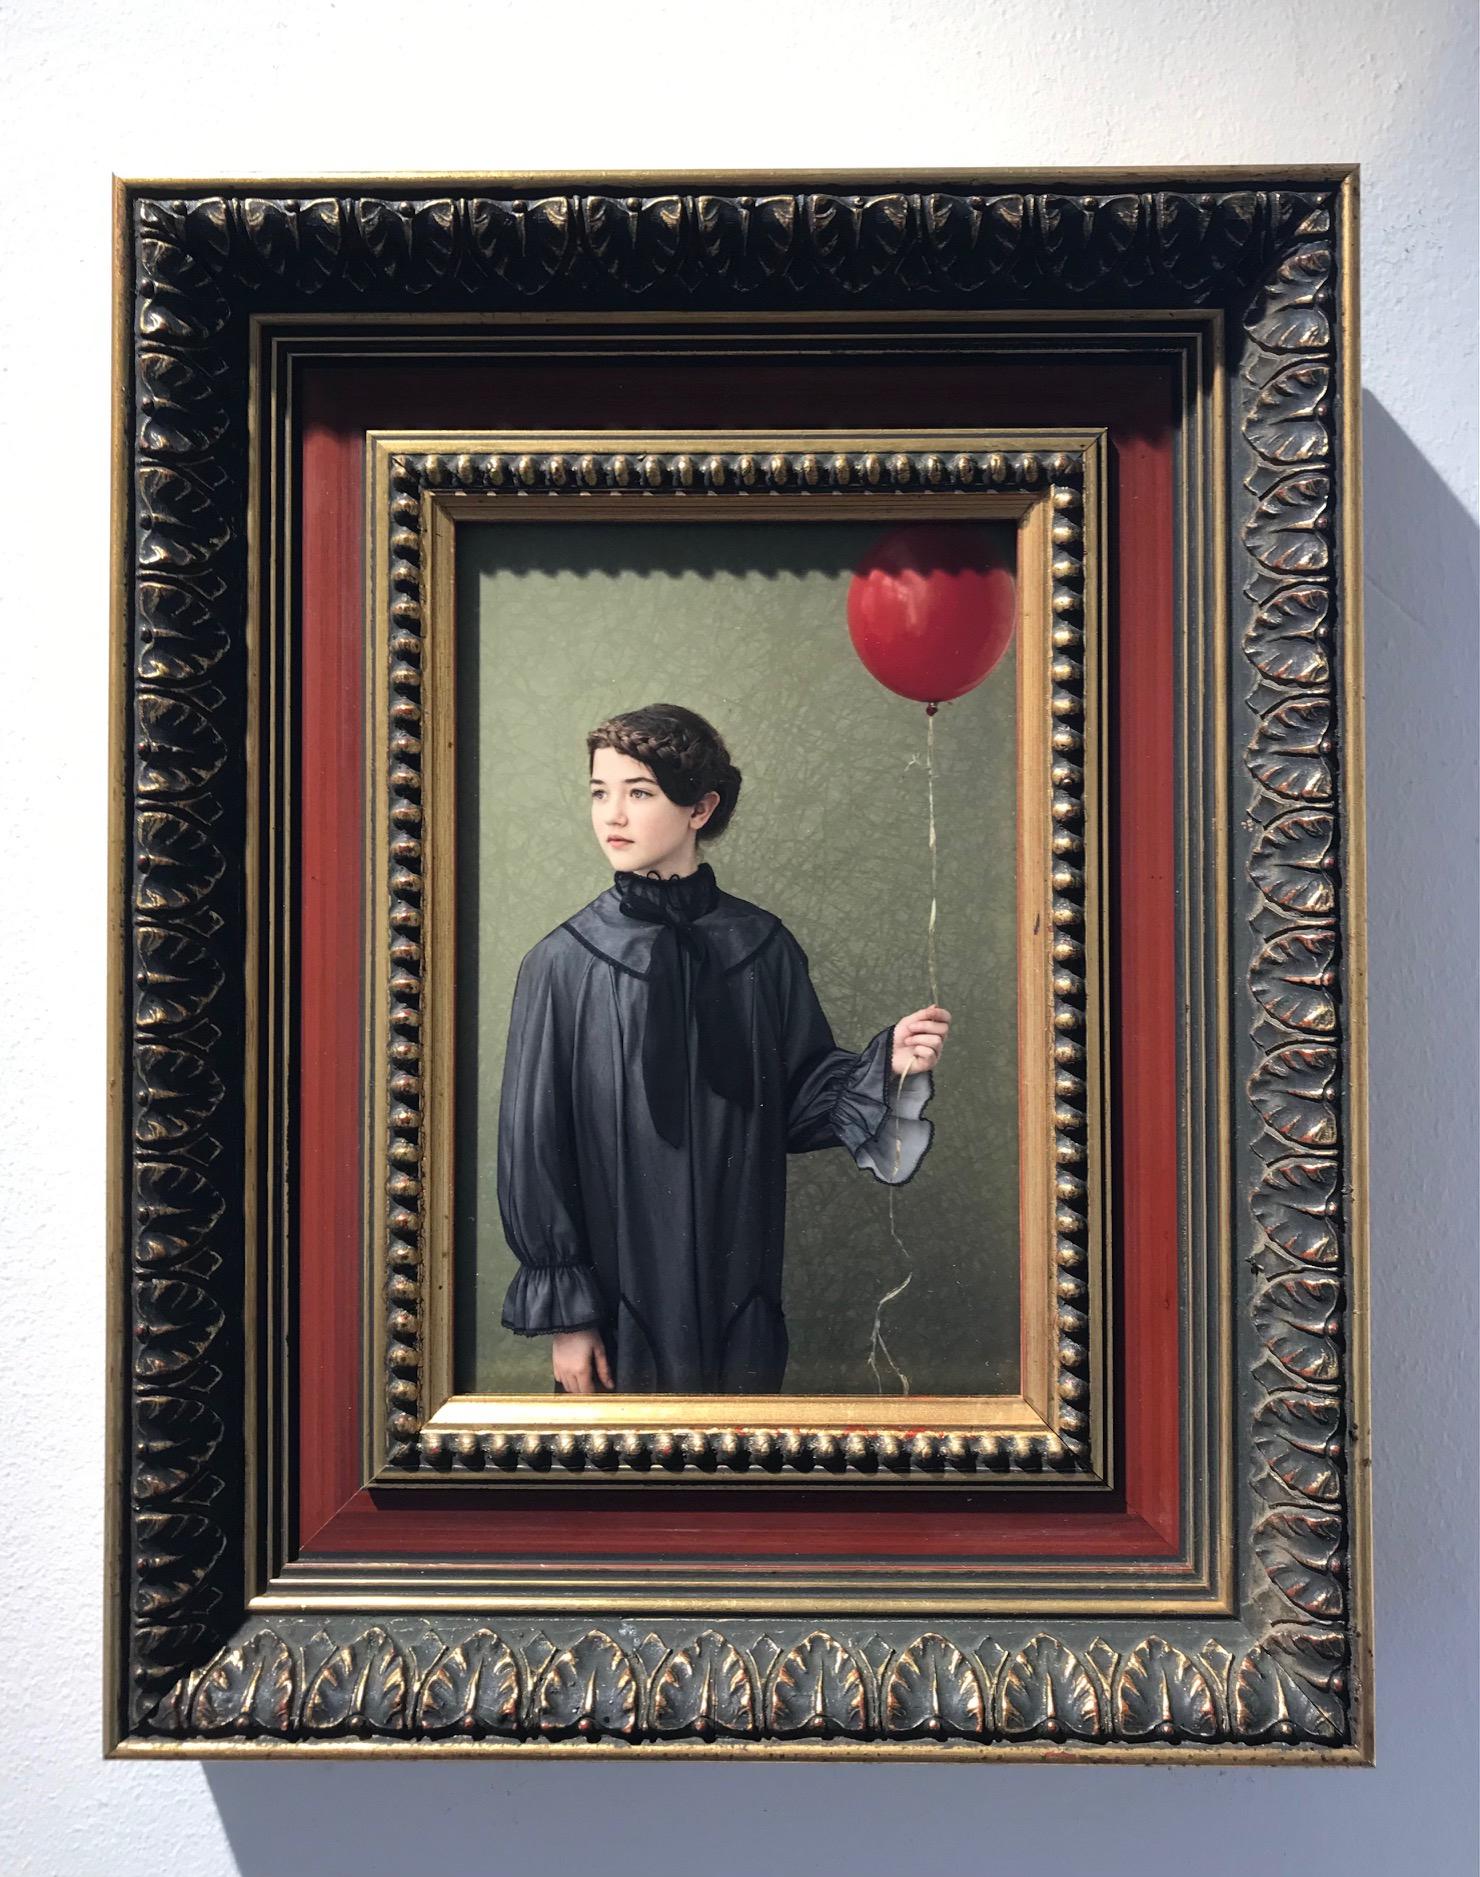 ''Childhood'' Dutch Contemporary Portrait of a Girl with Red Balloon - Photograph by Ursula van de Bunte